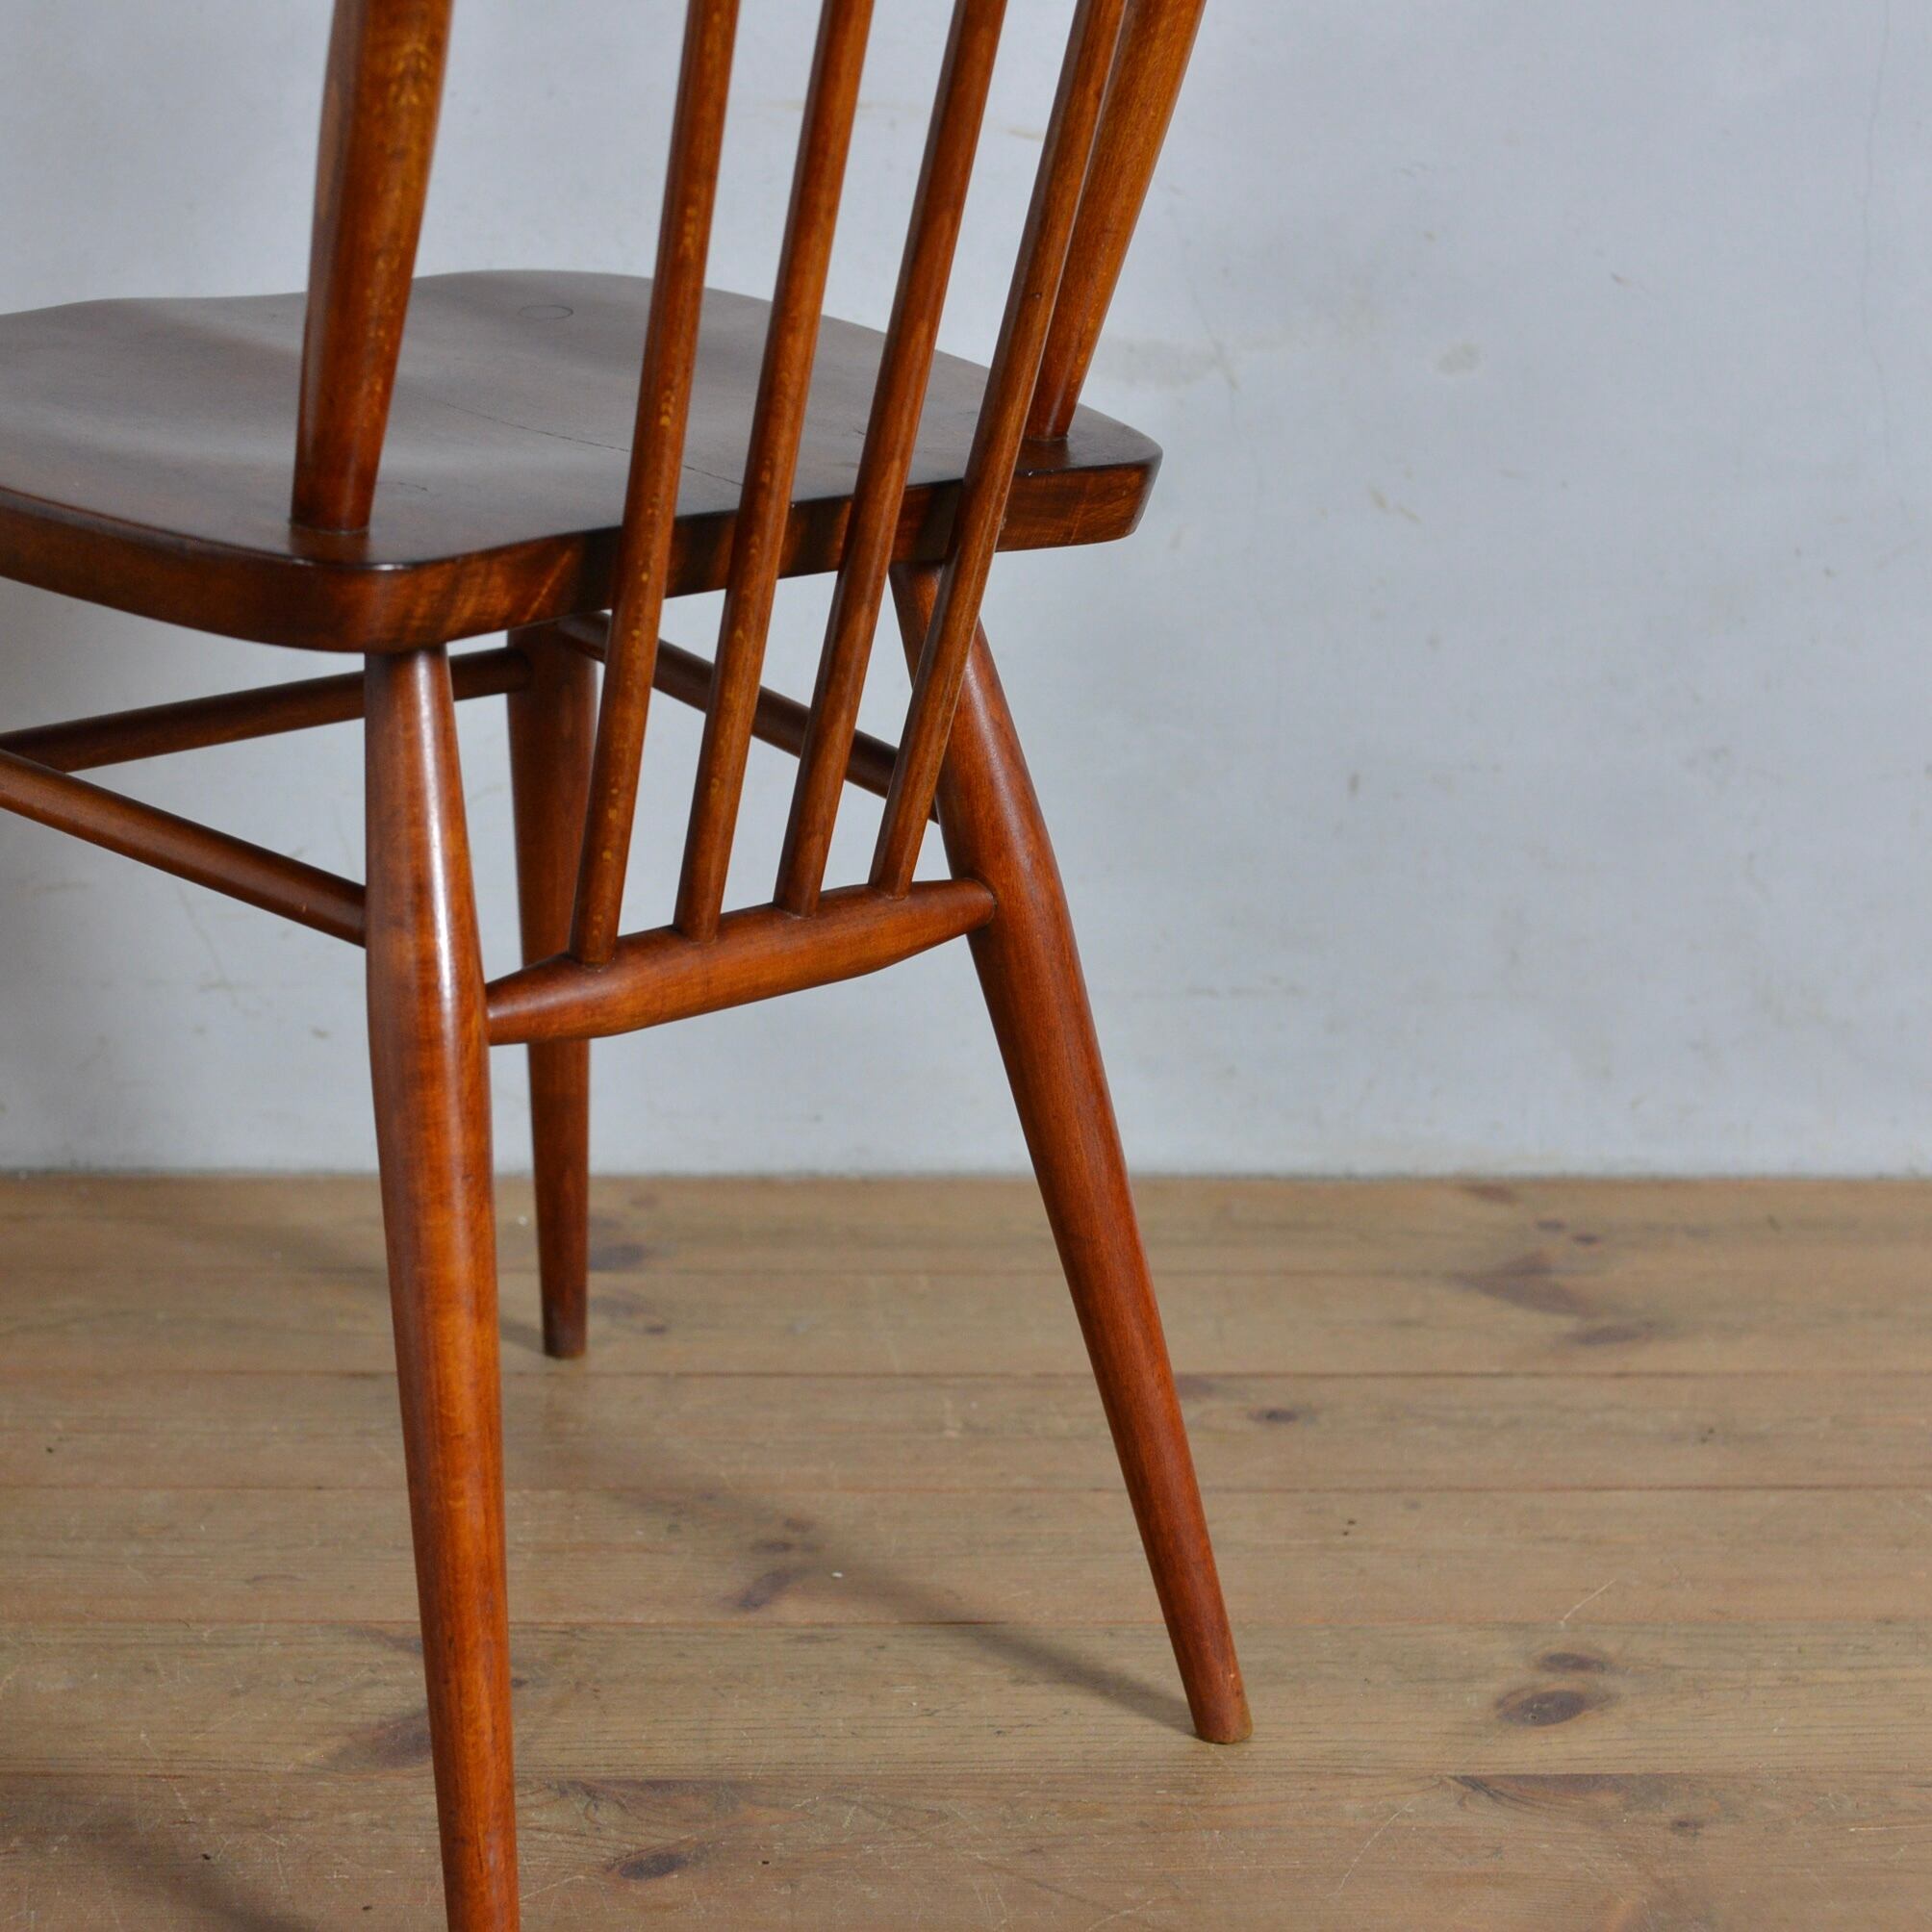 Ercol Stickback Chair / アーコール スティックバック チェア　【A】〈ダイニングチェア〉112116 | SHABBY'S  MARKETPLACE　アンティーク・ヴィンテージ 家具や雑貨のお店 powered by BASE